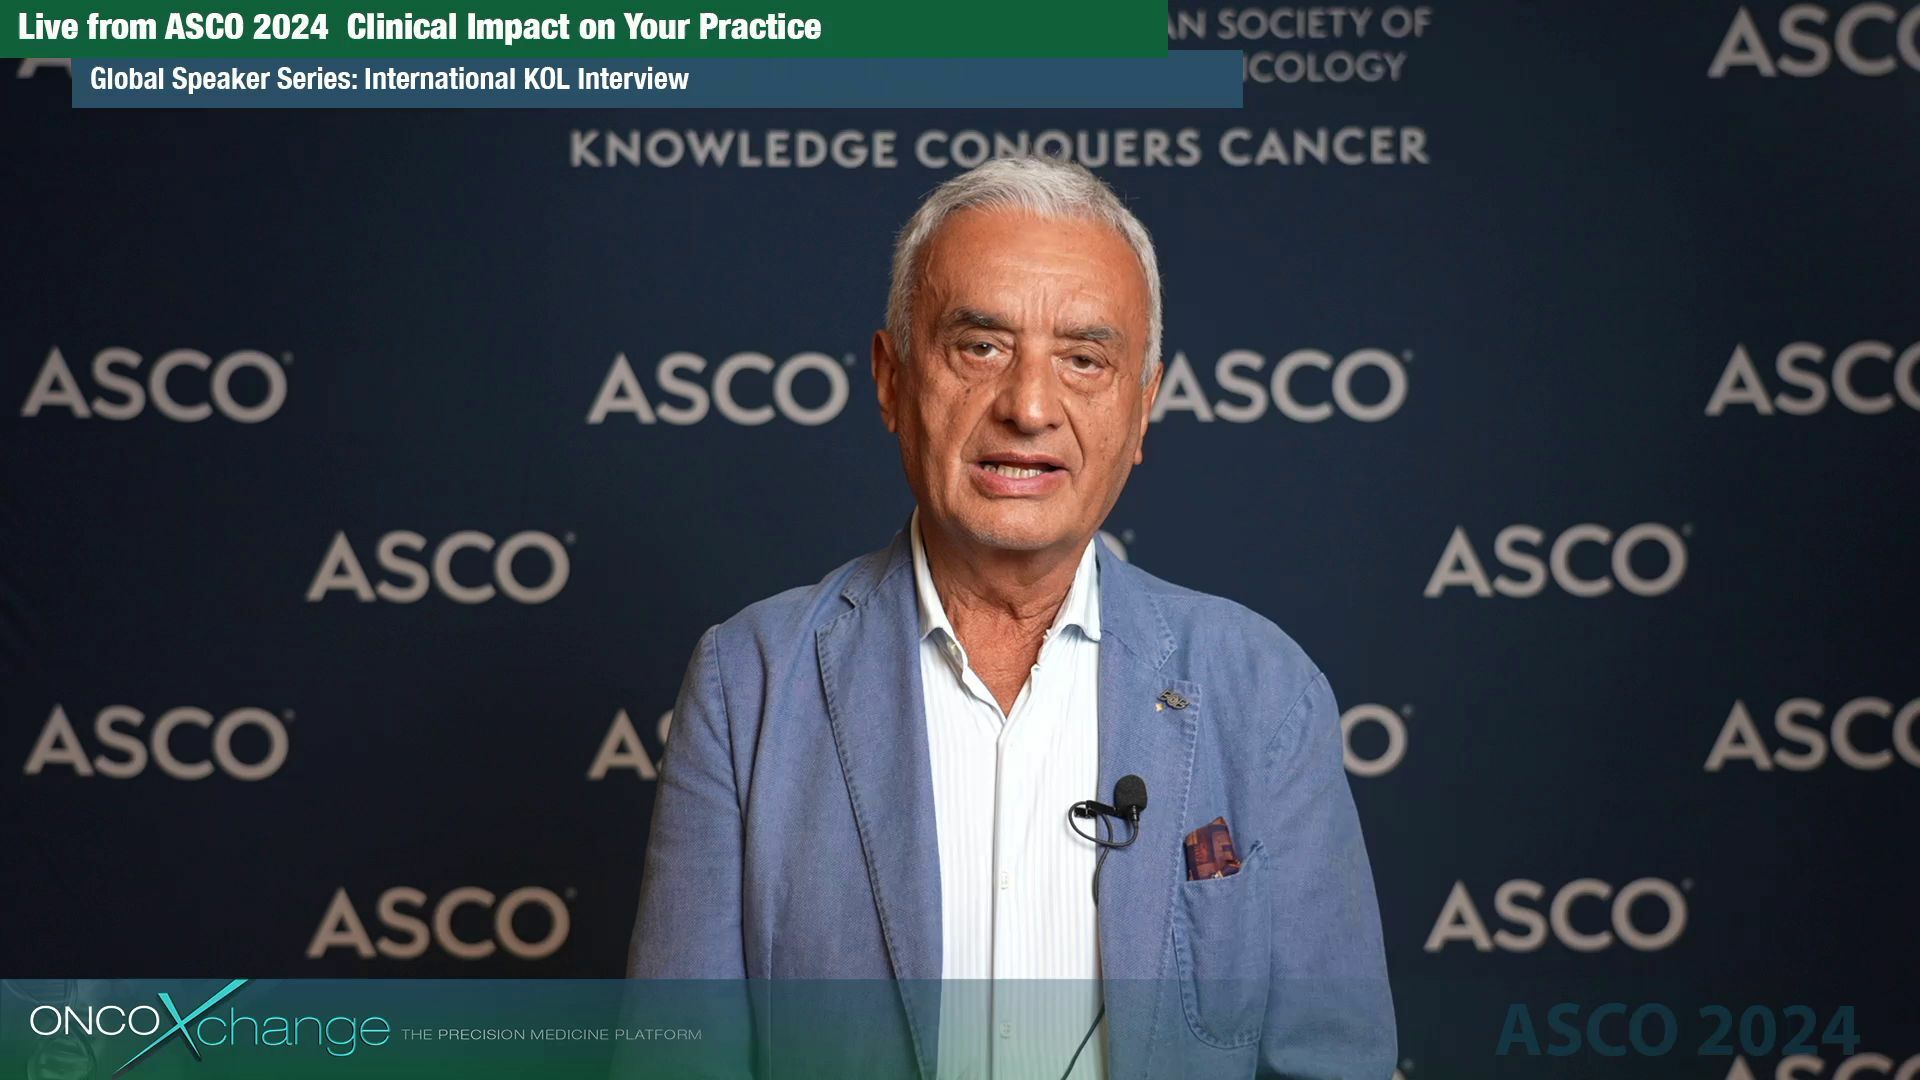 Dr. Pier Franco Conte on the A-BRAVE Trial: Avelumab in Early Triple-Negative Breast Cancer